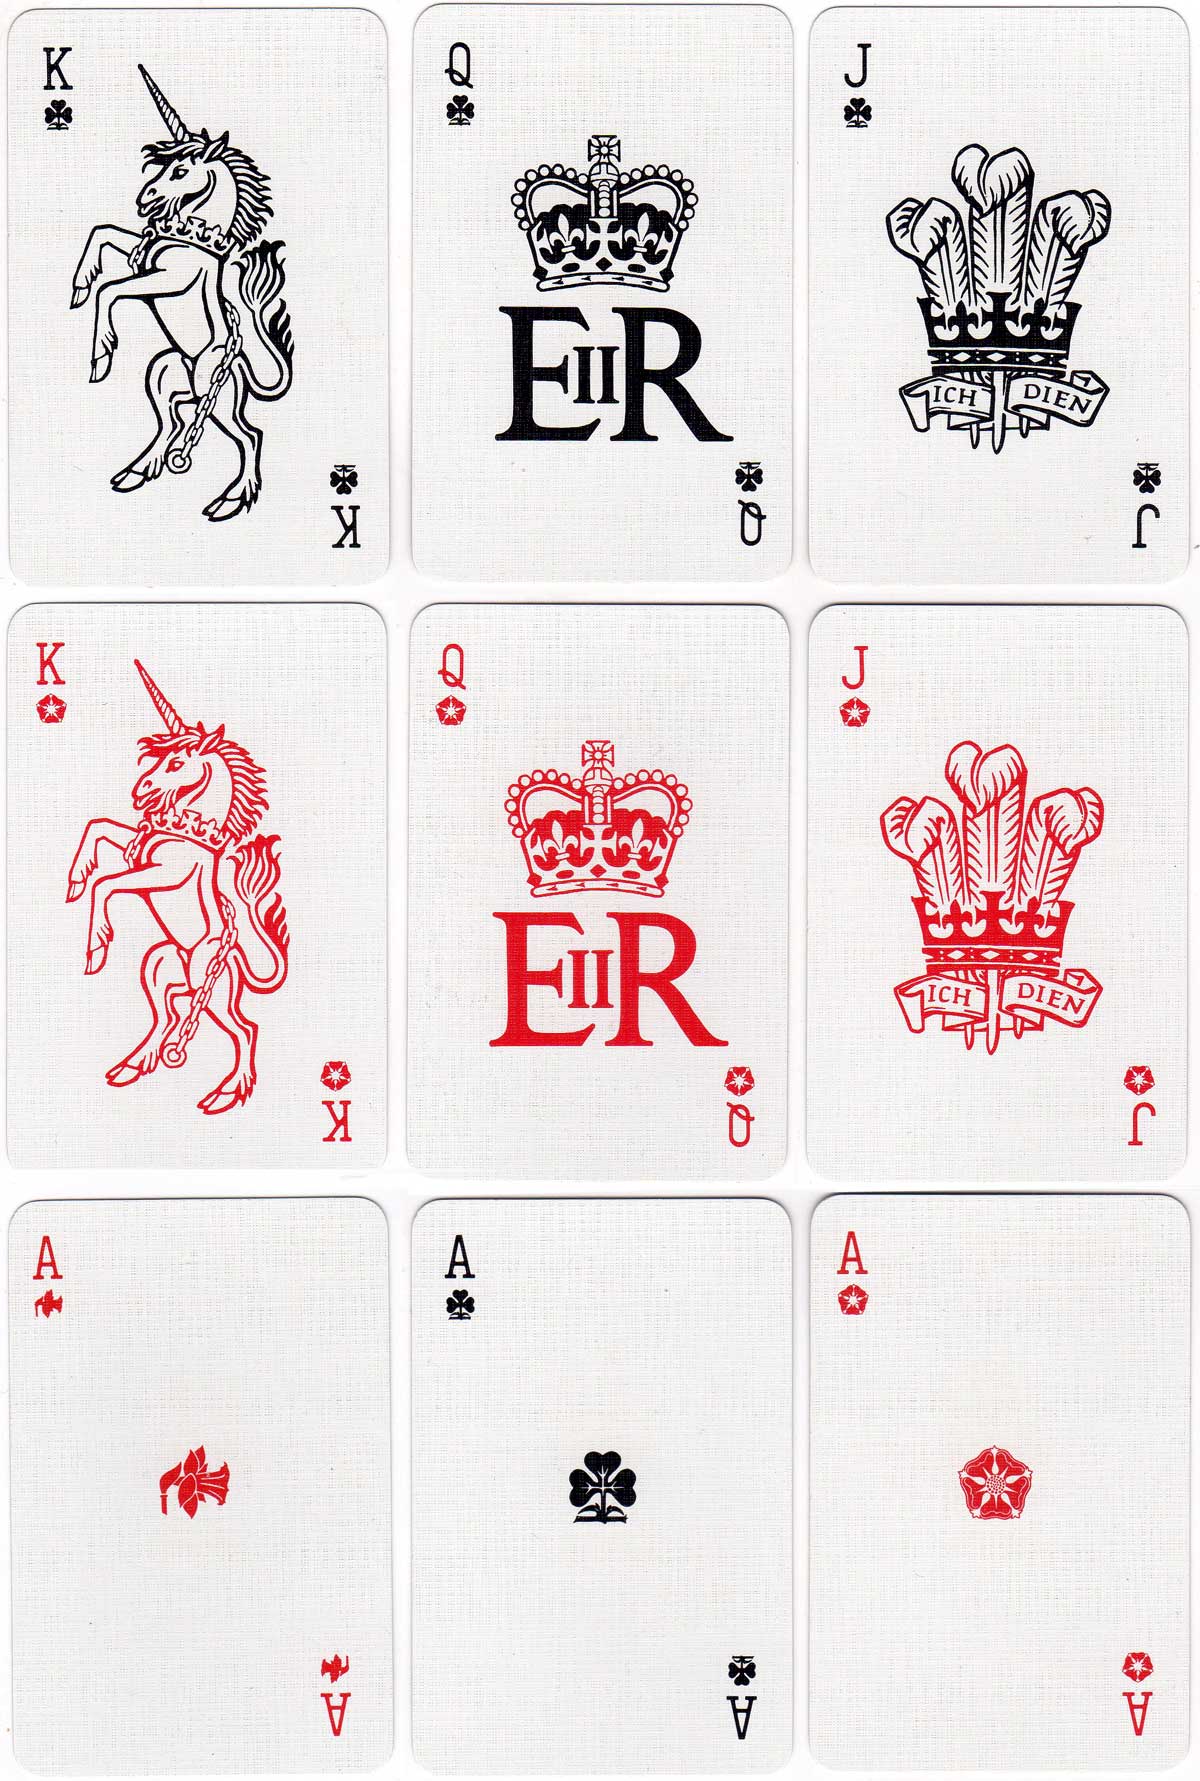 Queen’s Silver Jubilee playing cards designed by Susan Rae for John Wadddington Ltd, 1977